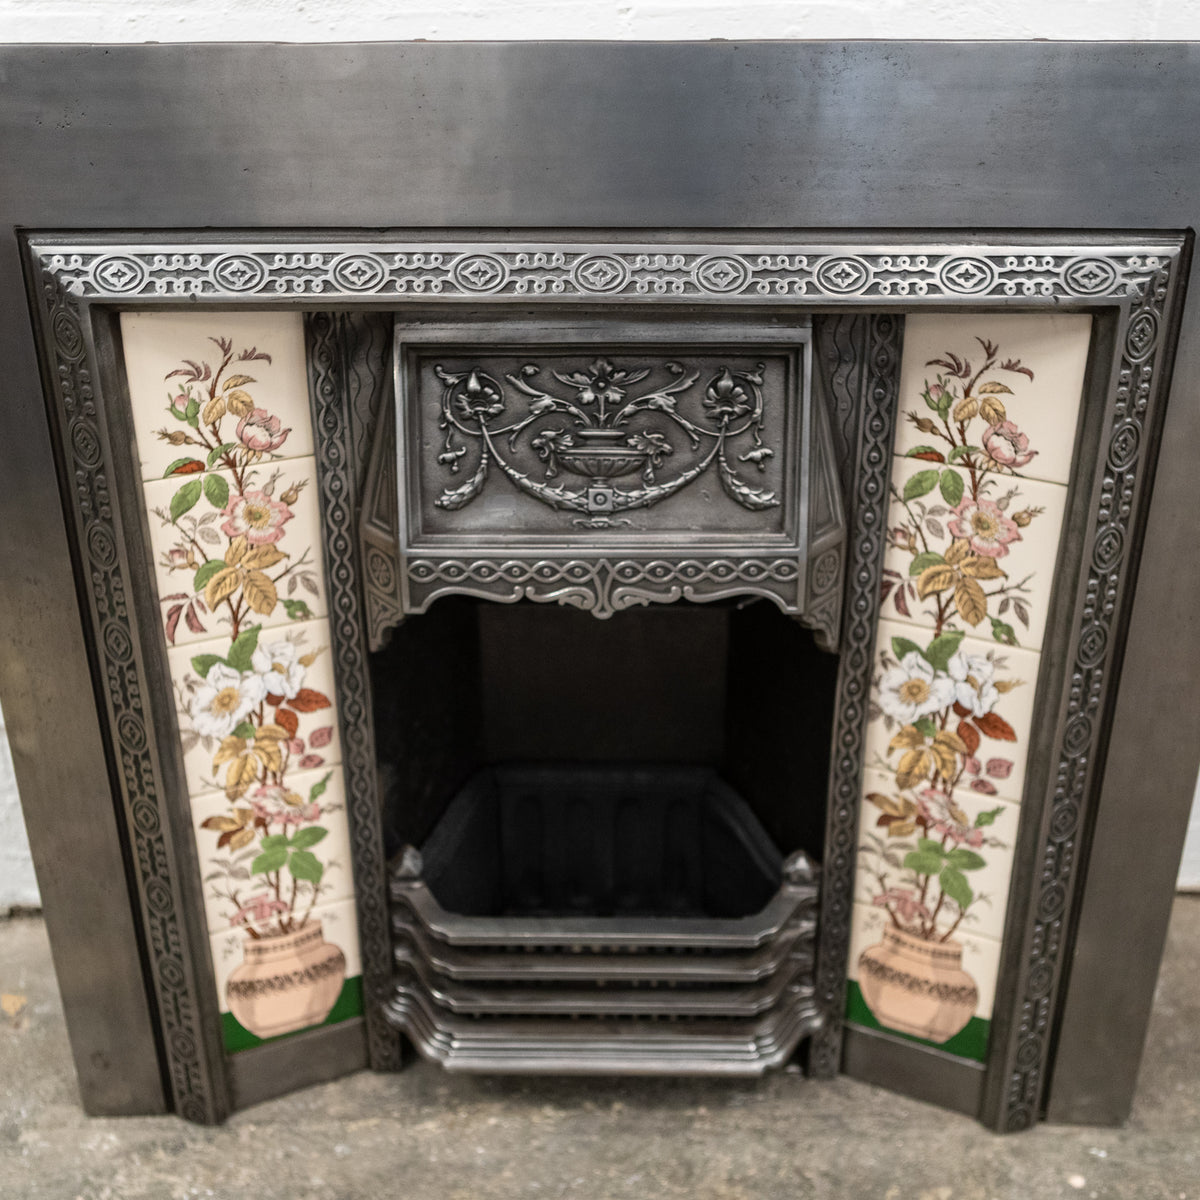 Reclaimed Polished Fireplace Insert with Tiles | The Architectural Forum